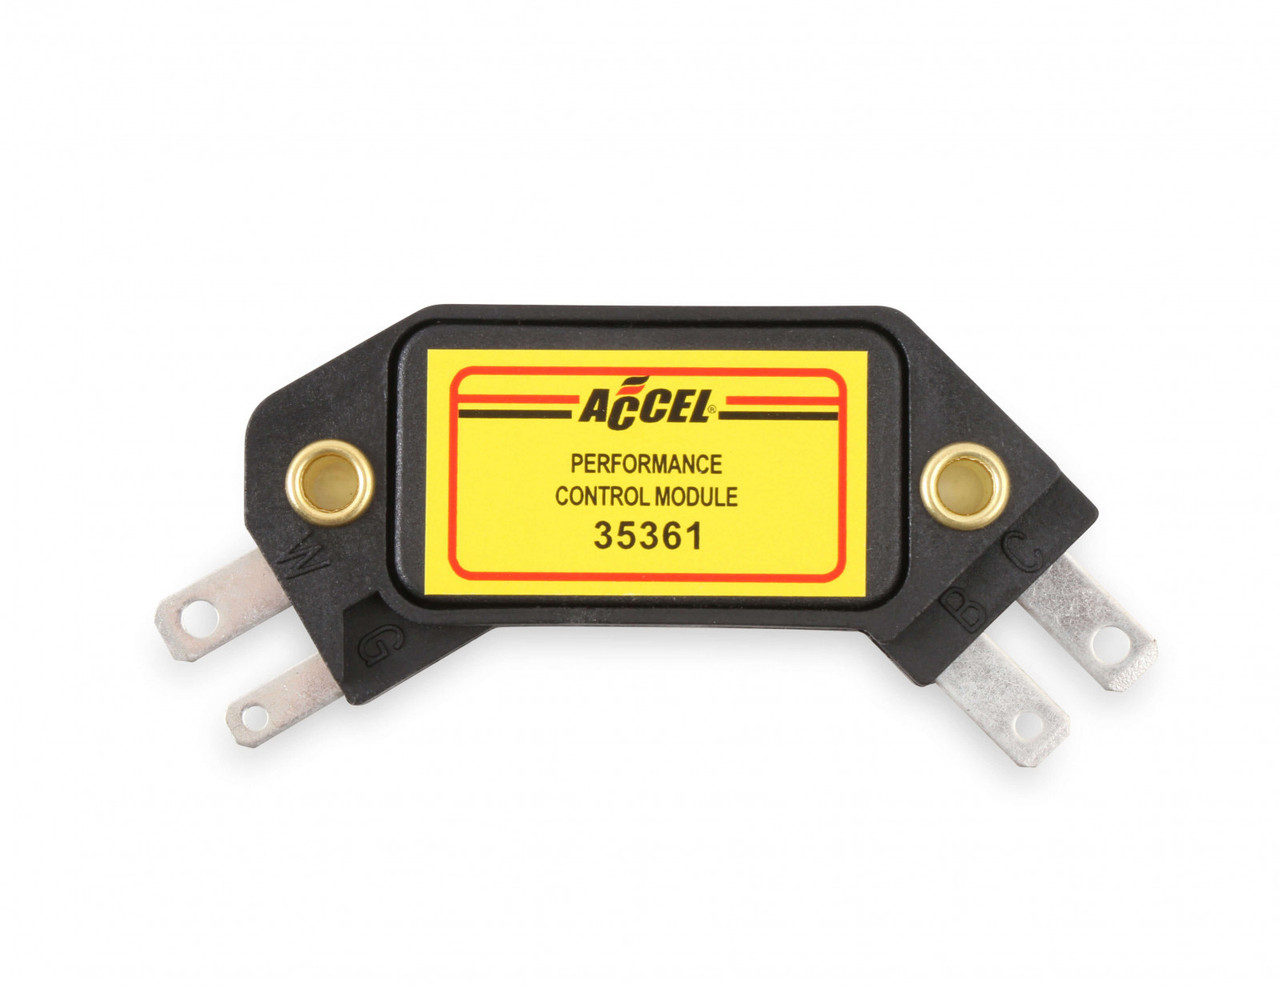 ACCEL High Performance Ignition Module for GM HEI 4 Pin (ACC-335361)